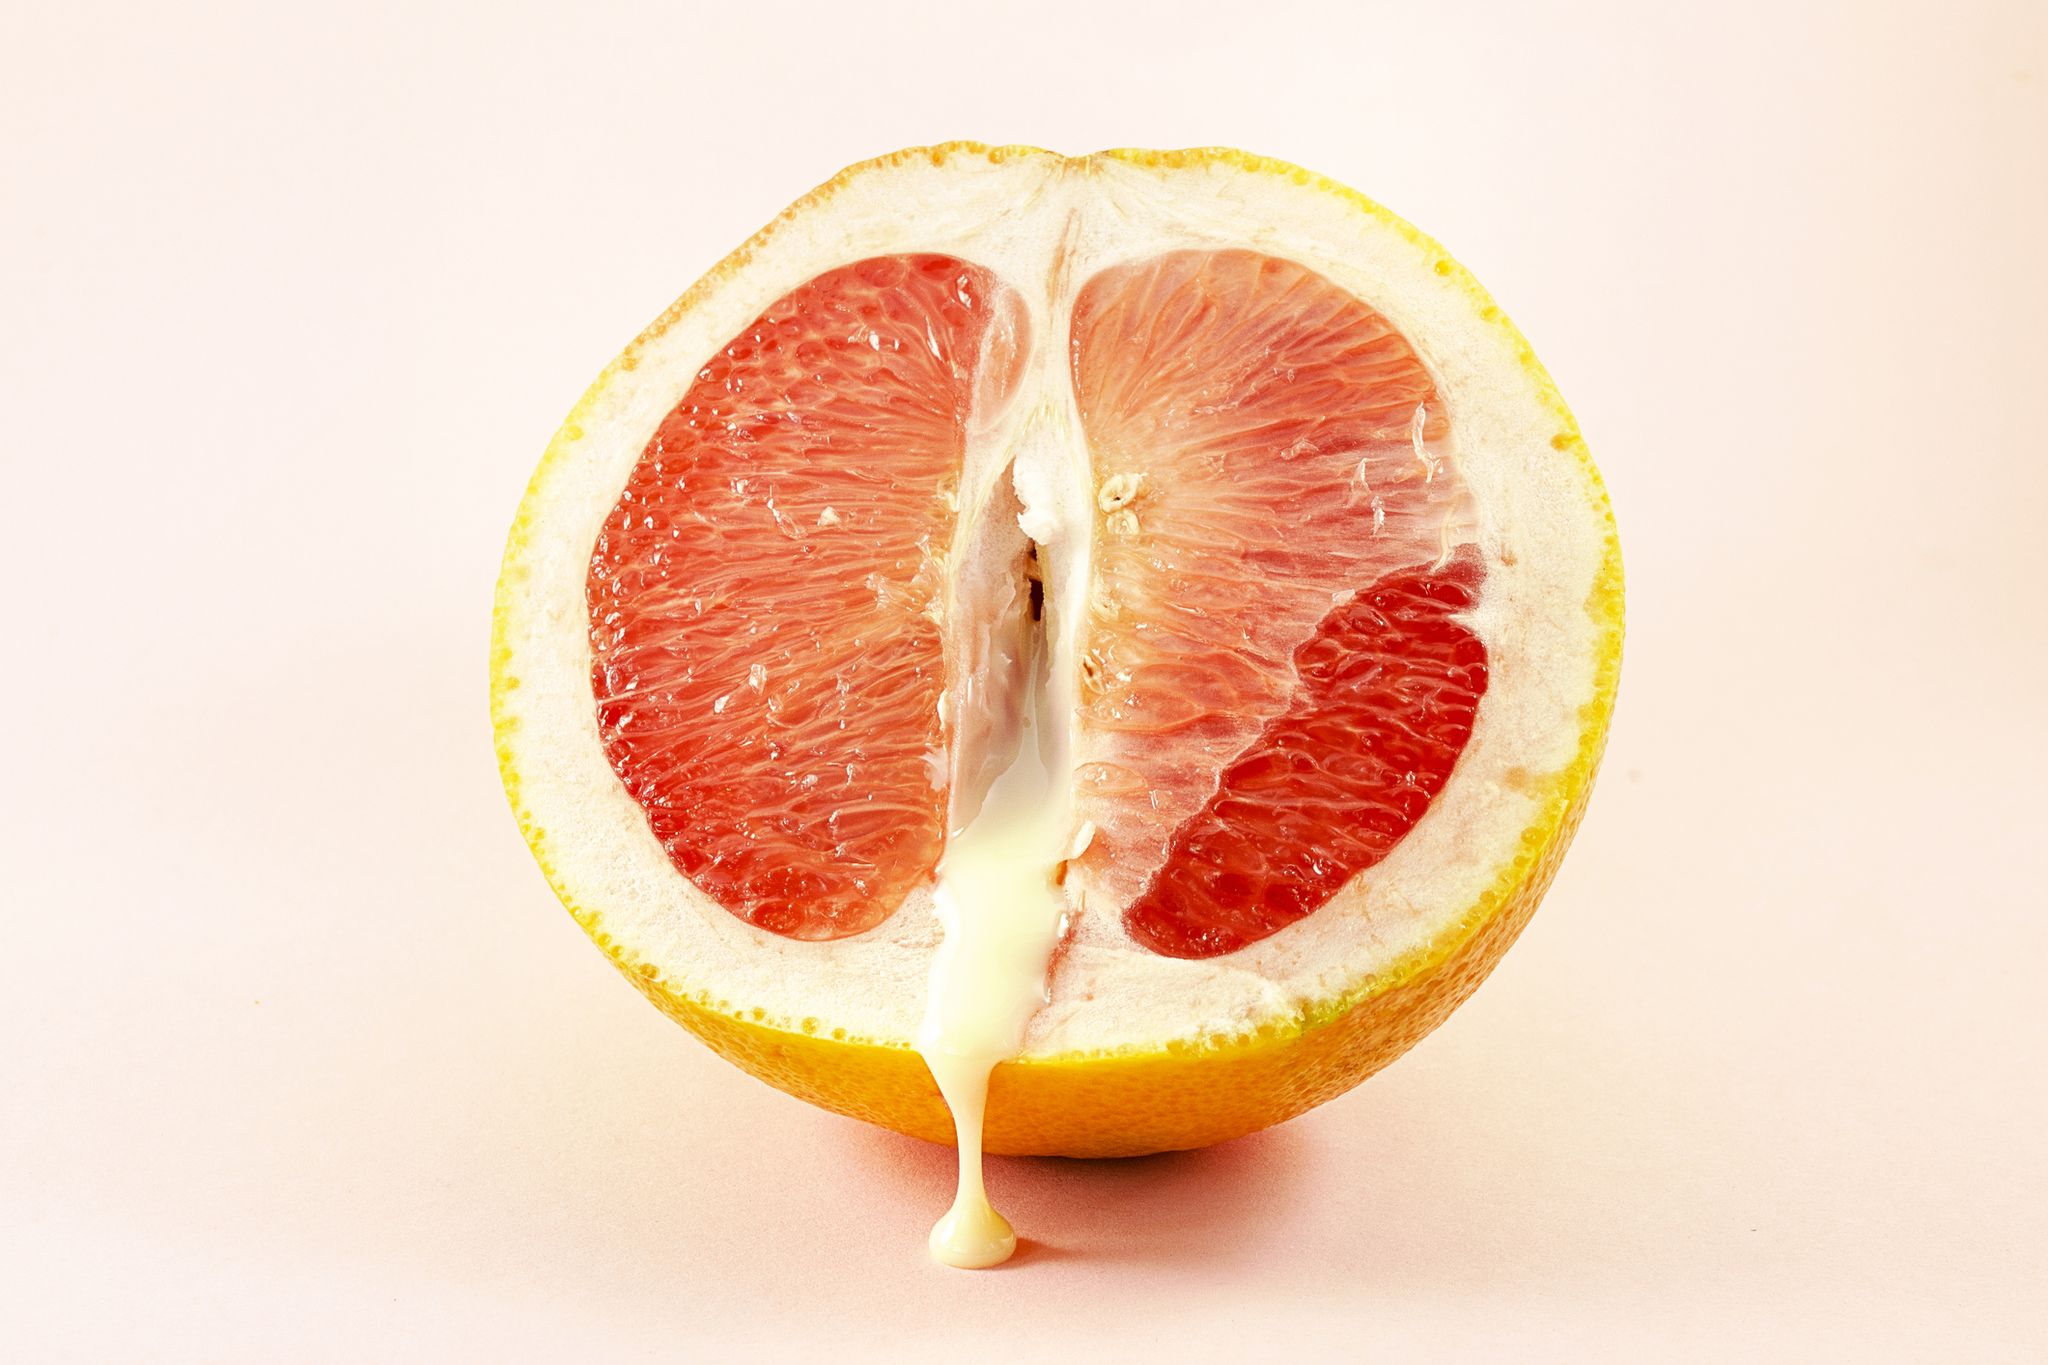 sexy grapefruit with sperm, erotic concept sectional grapefruit is a symbol of the vagina and clitoris